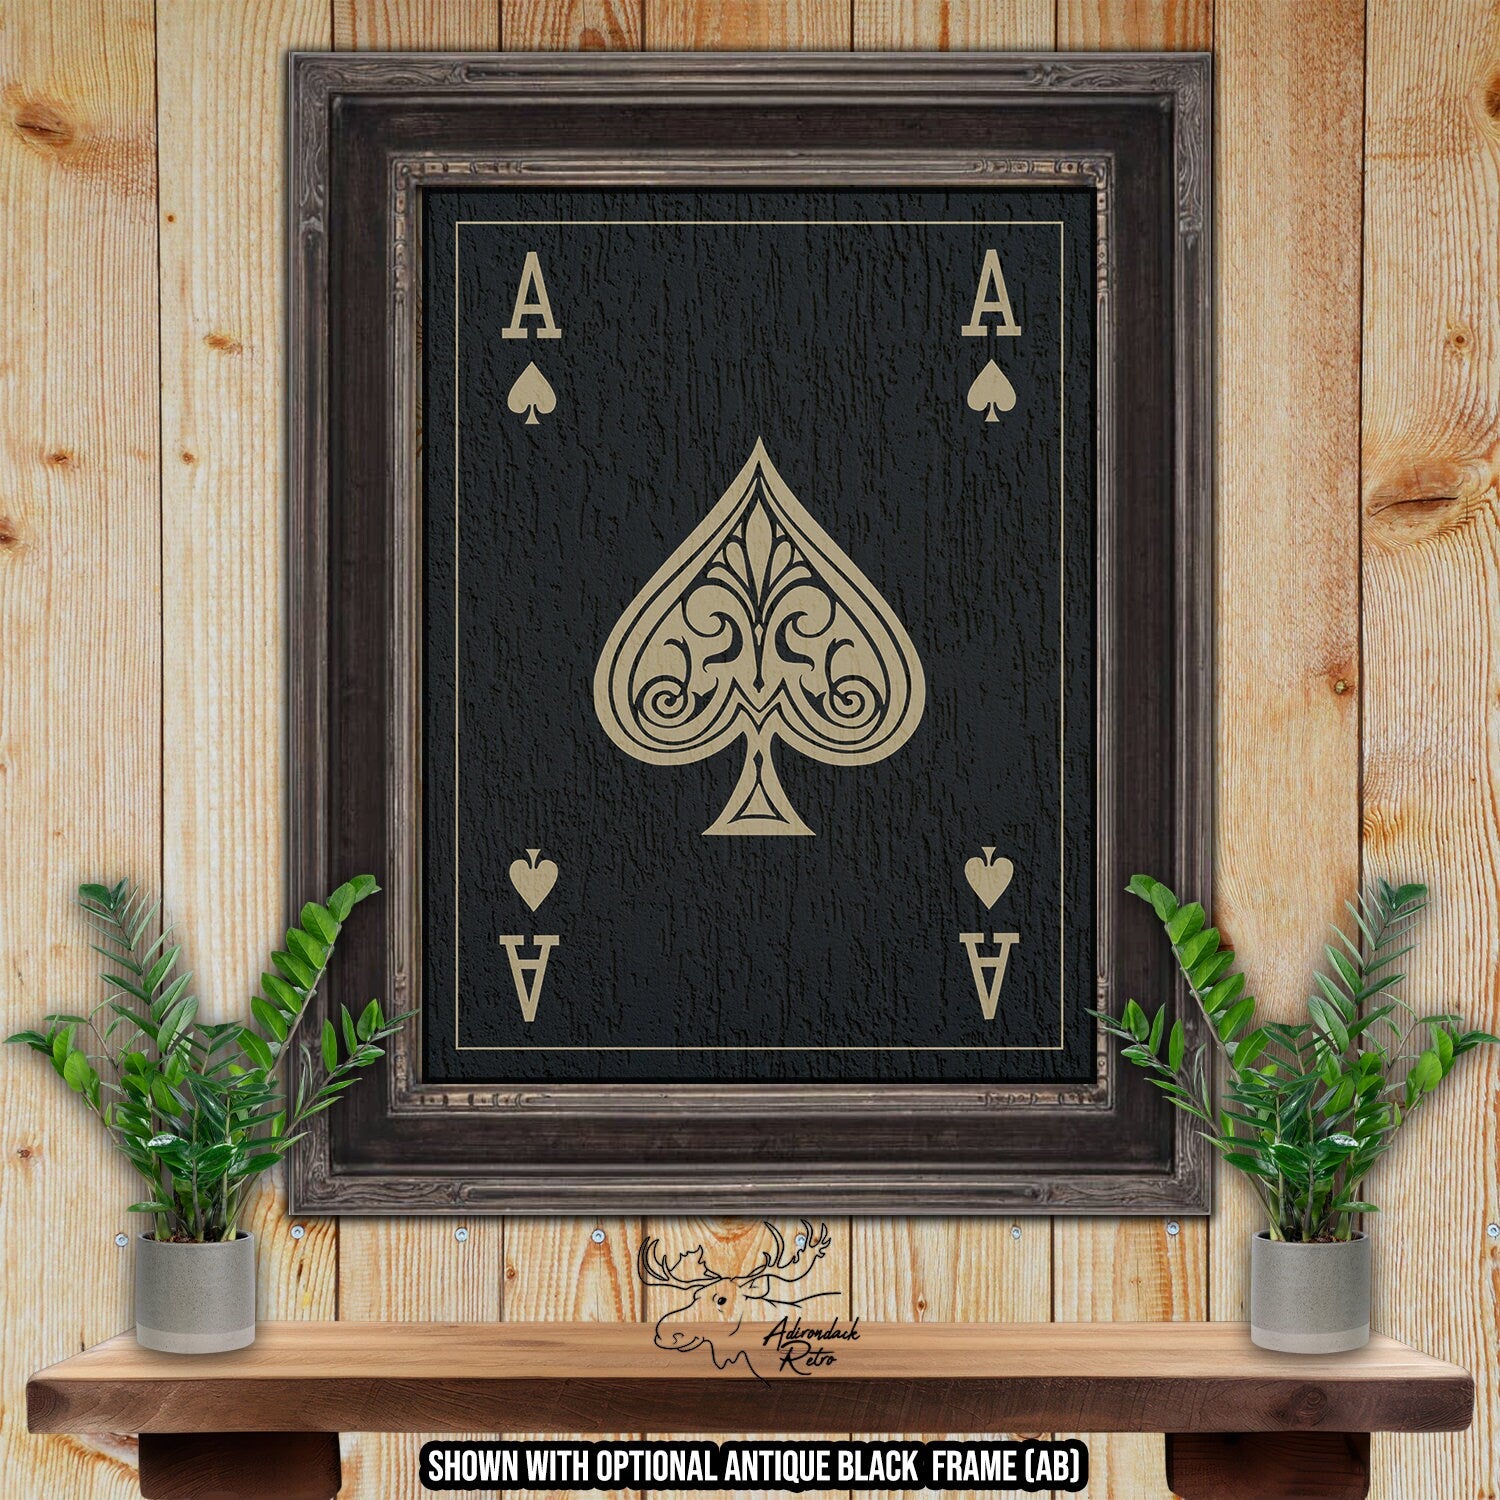 Ace of Spades Playing Card Fine Art Print - Black and Tan Death Card Poster Art at Adirondack Retro